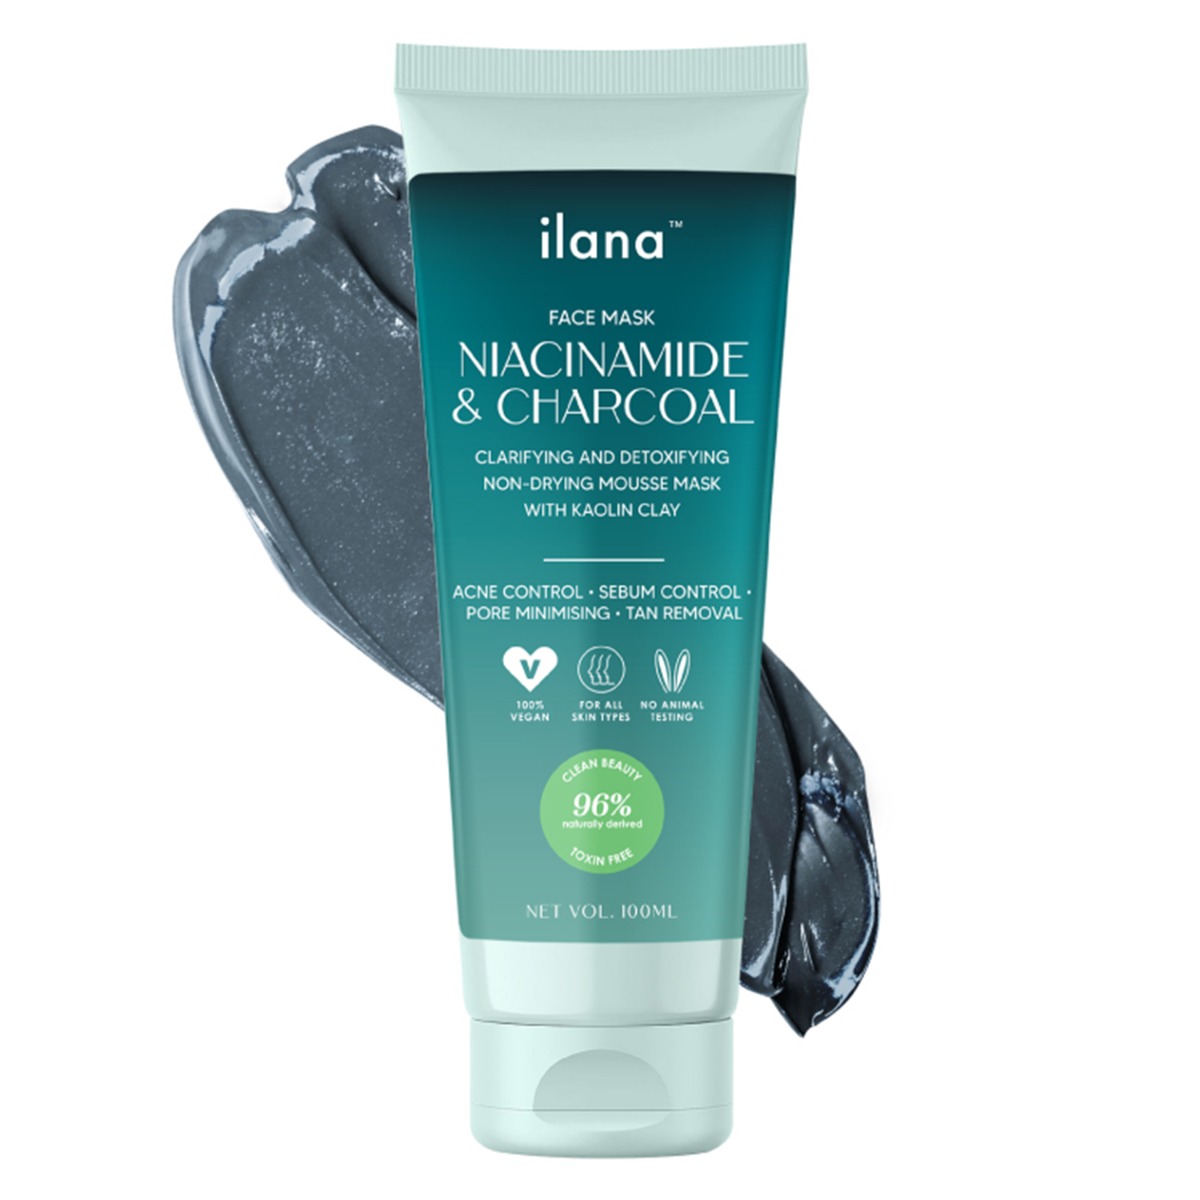 Ilana Niacinamide and Charcoal Face Mask, Clarifying and Detoxing Mousse with Kaolin Clay, 100ml